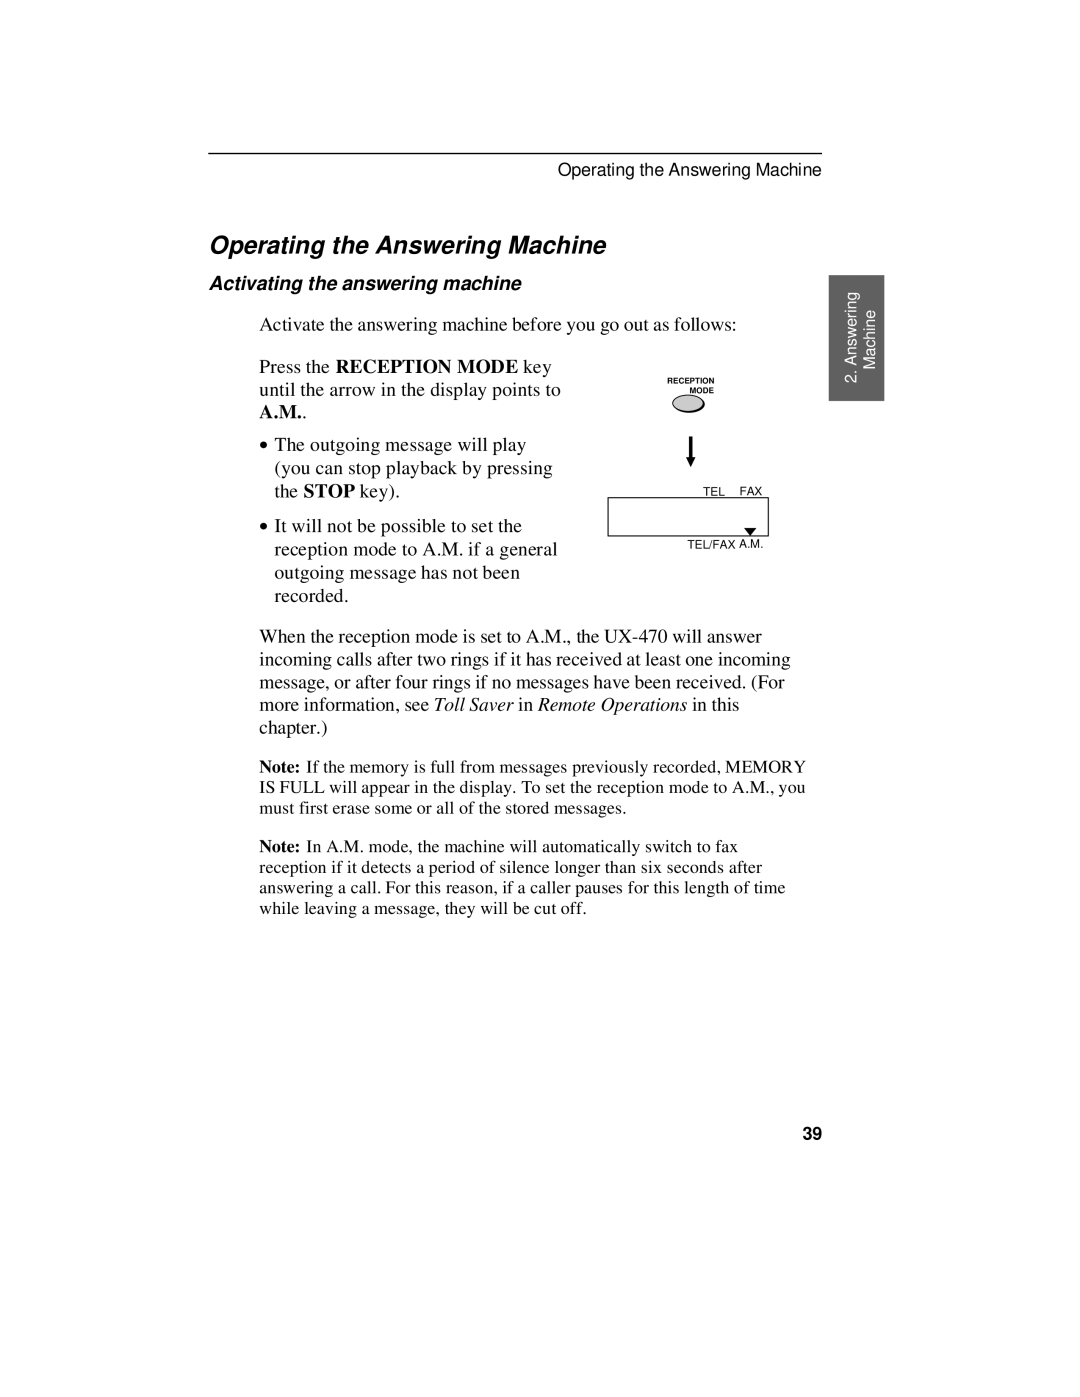 Sharp UX-470 operation manual Operating the Answering Machine, Activating the answering machine 